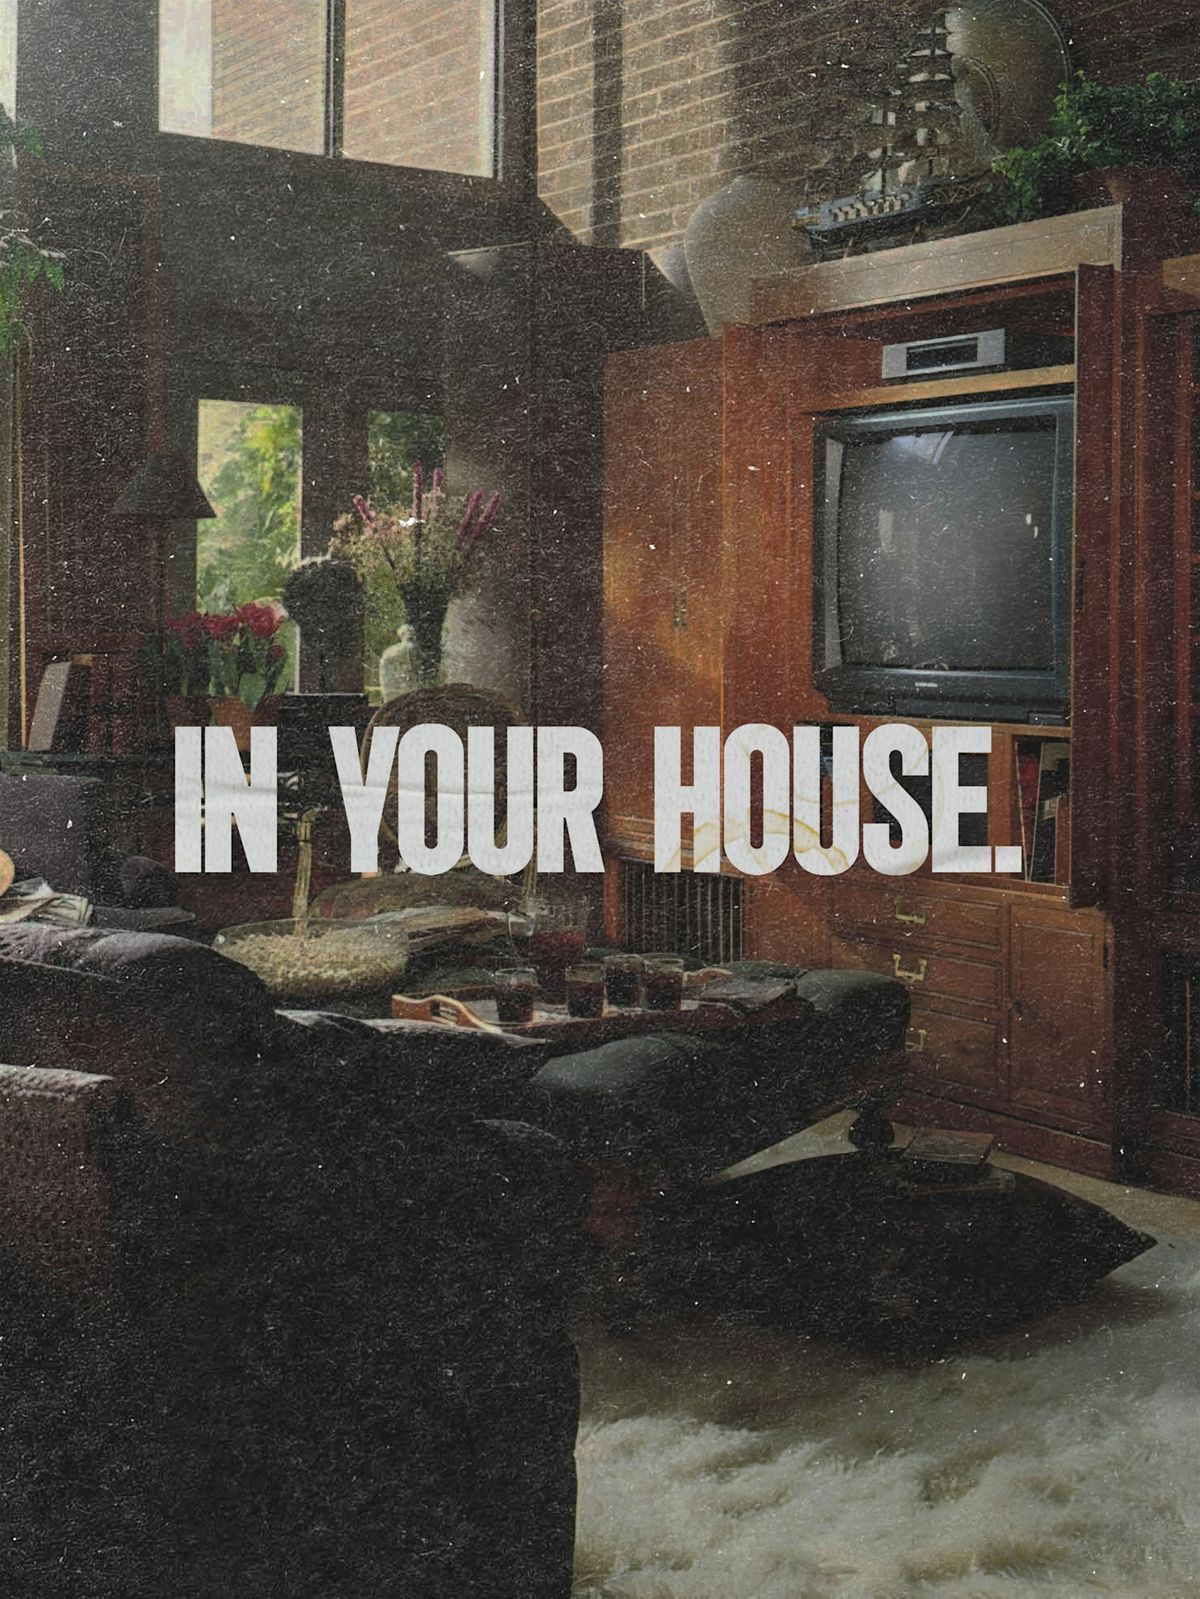 In Your House: 3-R, Pink Daytona, Buunkin, BRKR, Rare Candyz, Smoothie Lou